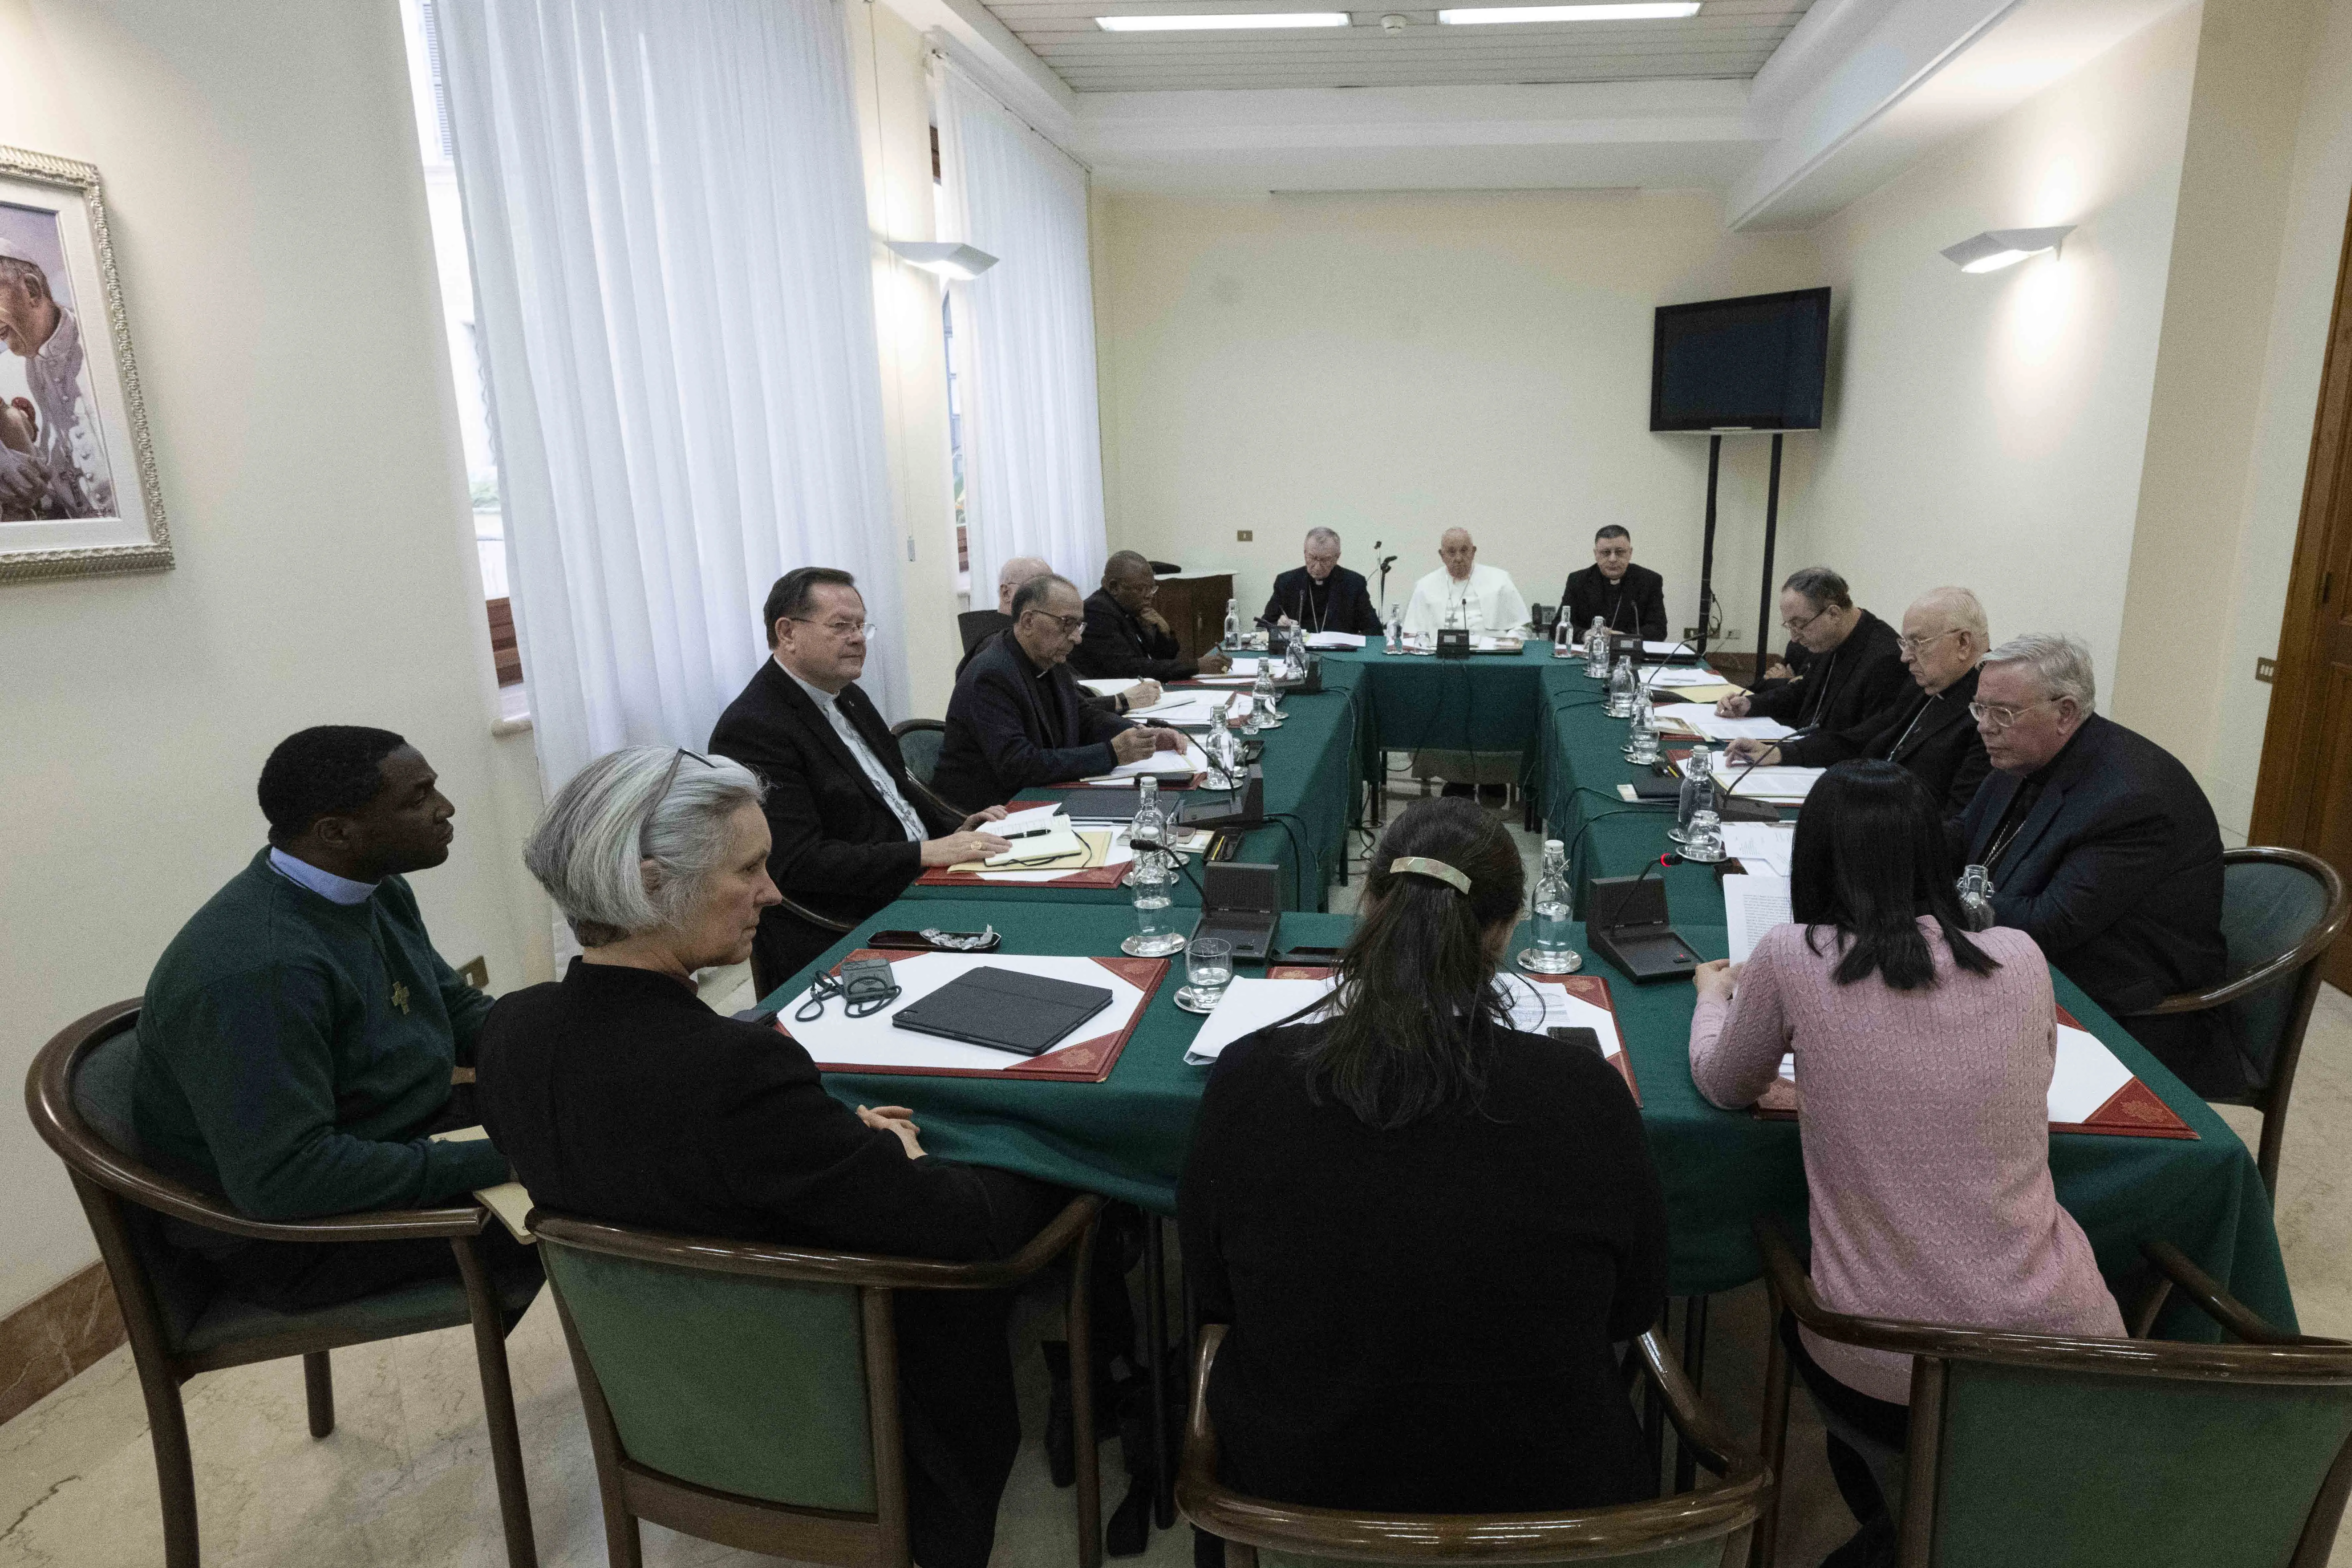 Female Anglican bishop participates in meeting with pope’s Council of Cardinals